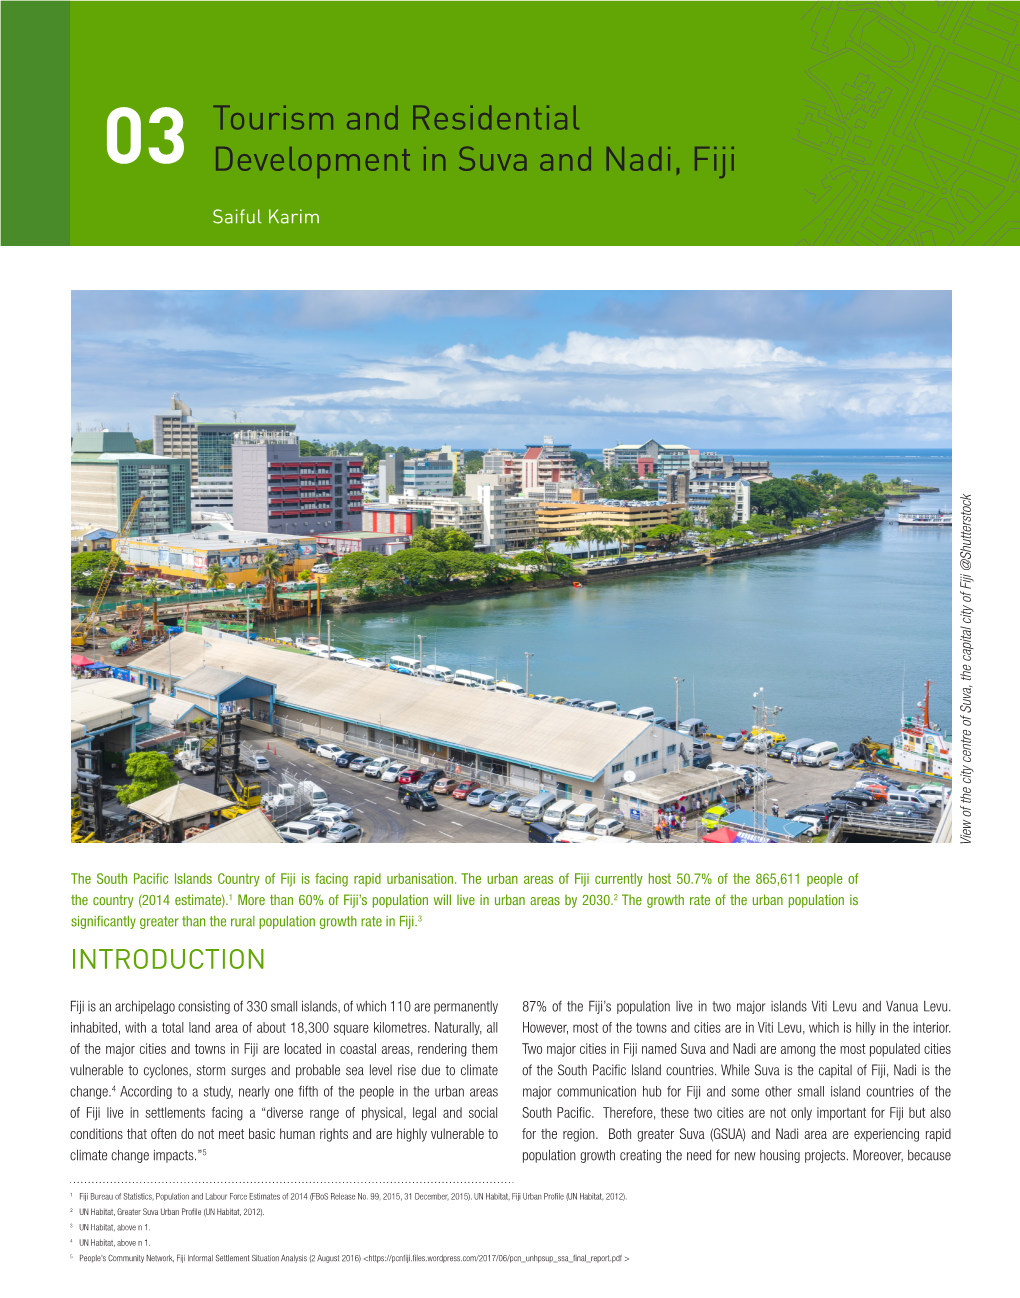 03 Tourism and Residential Development in Suva and Nadi, Fiji